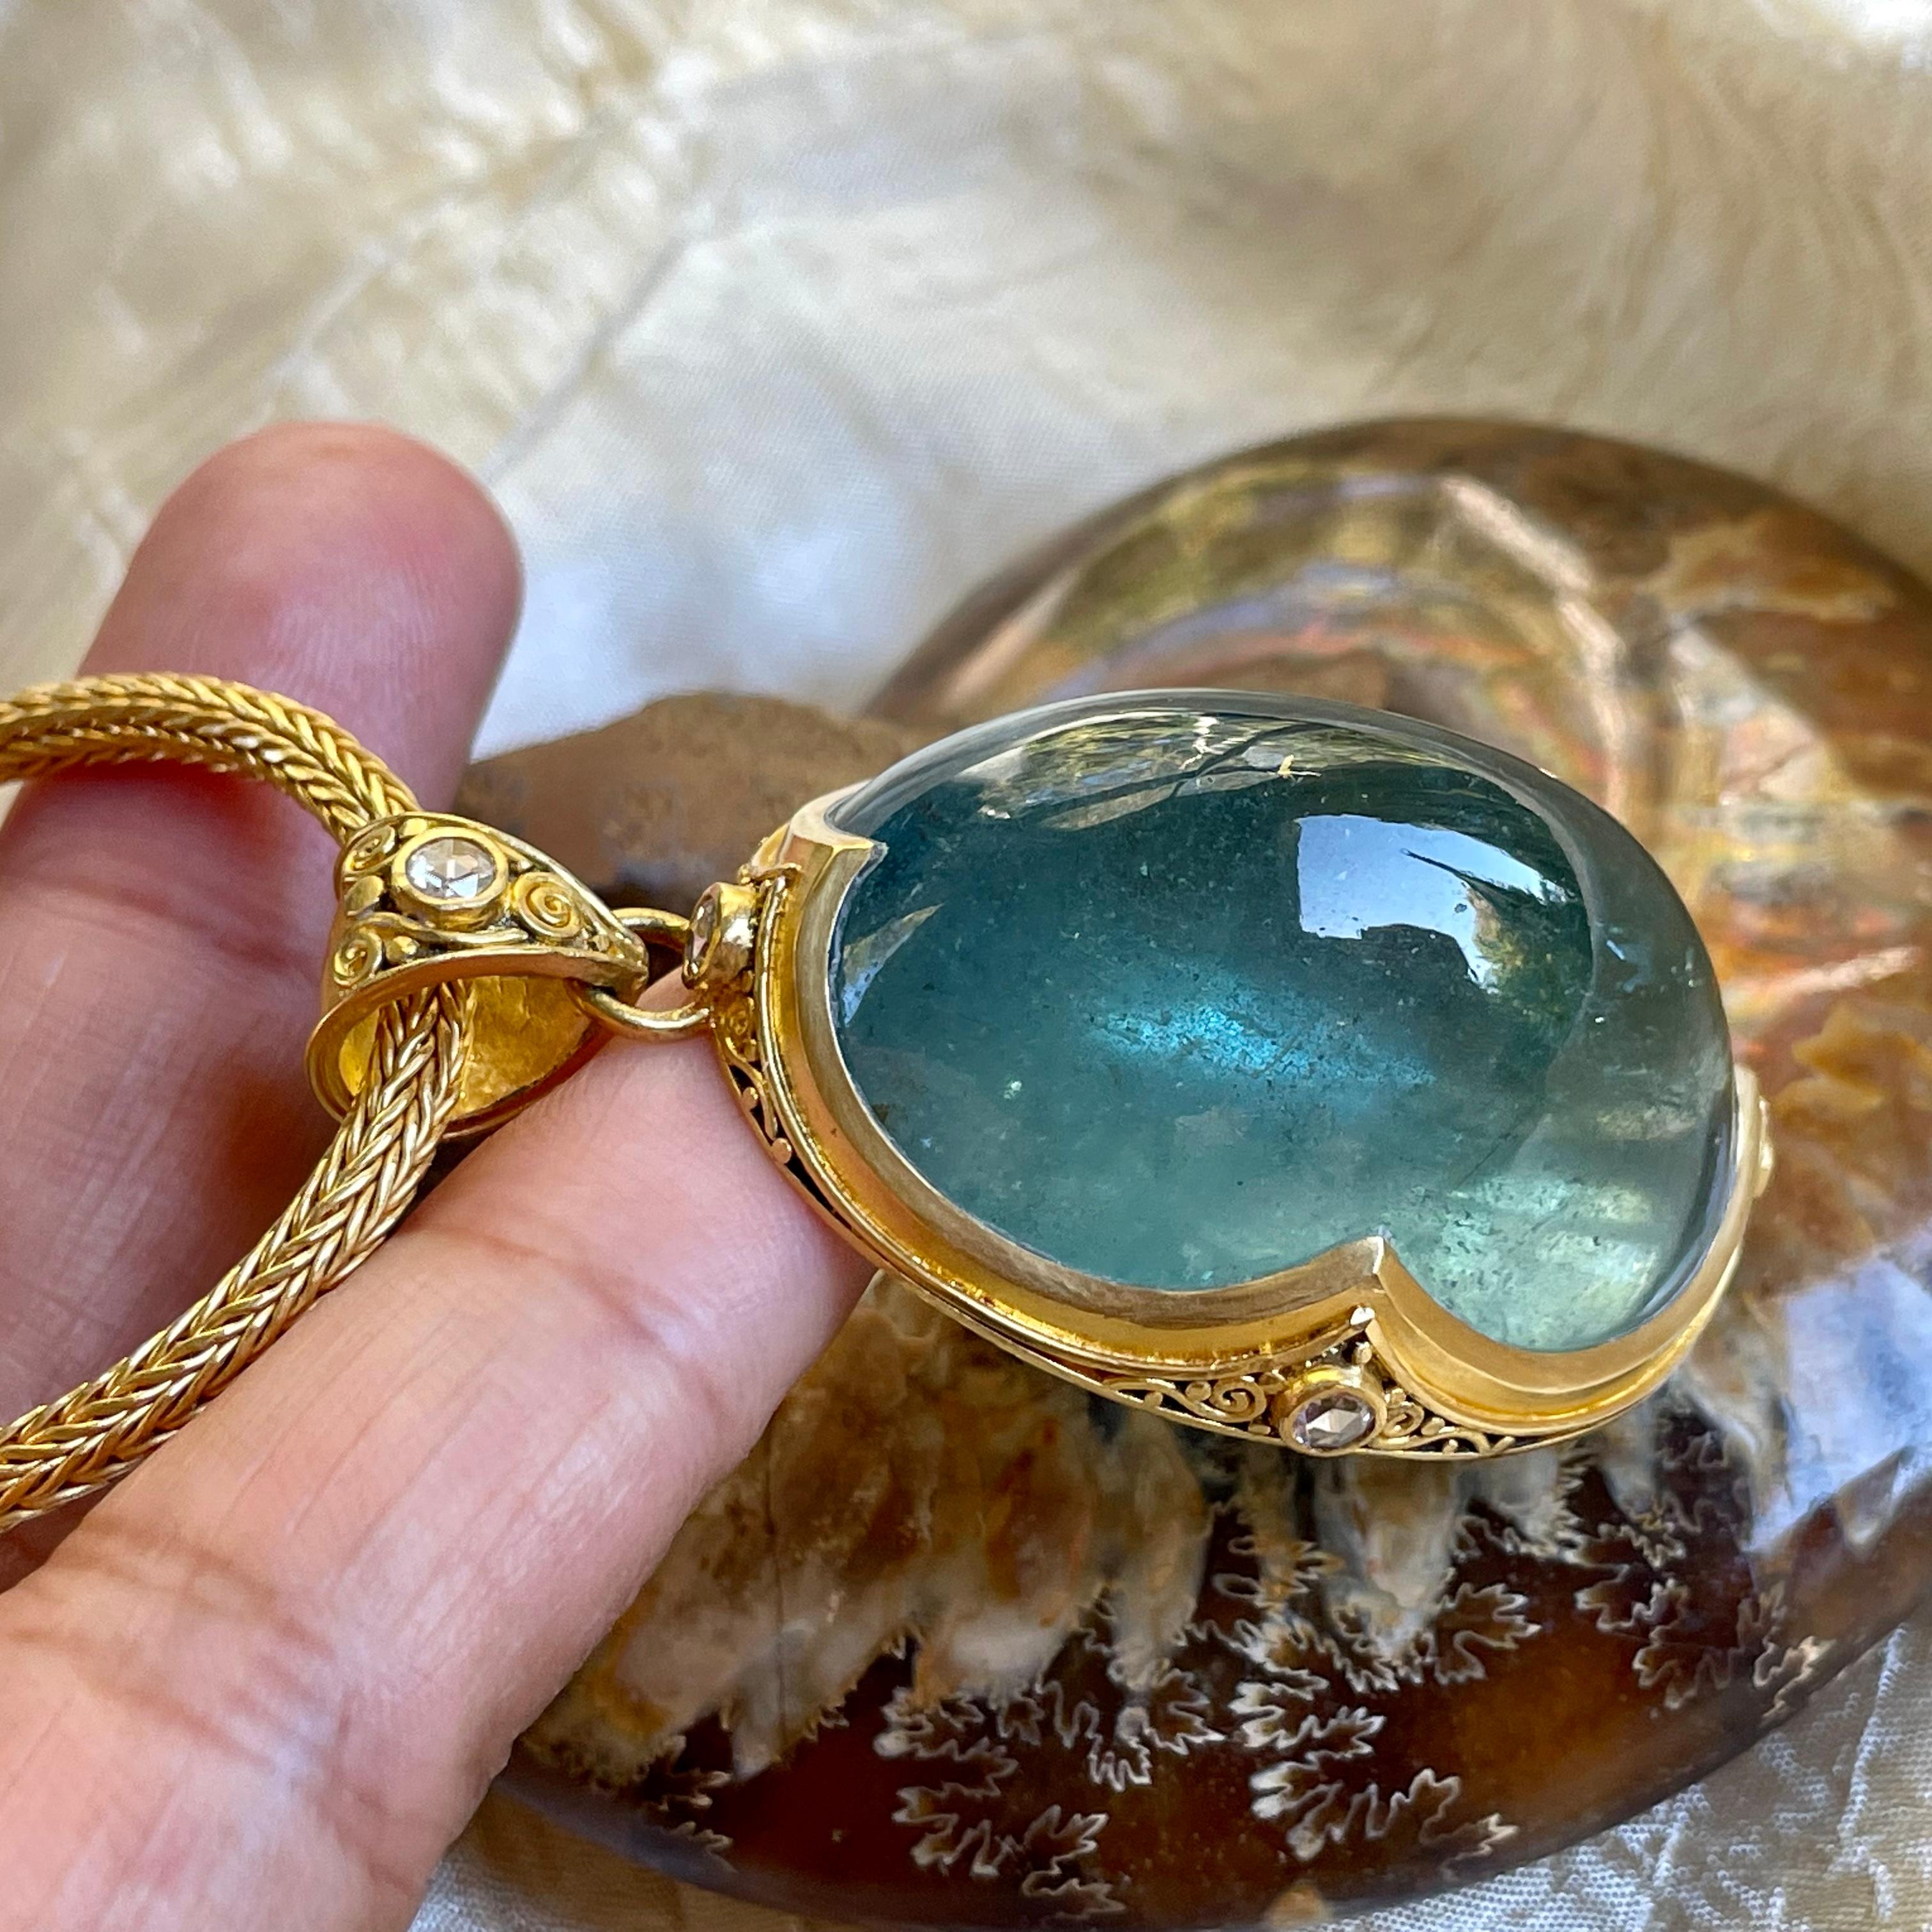 An incredible deep blue Brazilian aquamarine 27 x 36 mm oval cabochon is the centerpiece of this amazing handmade high-Karat gold pendant.  The stone is set in a Steven Battelle designed signature 